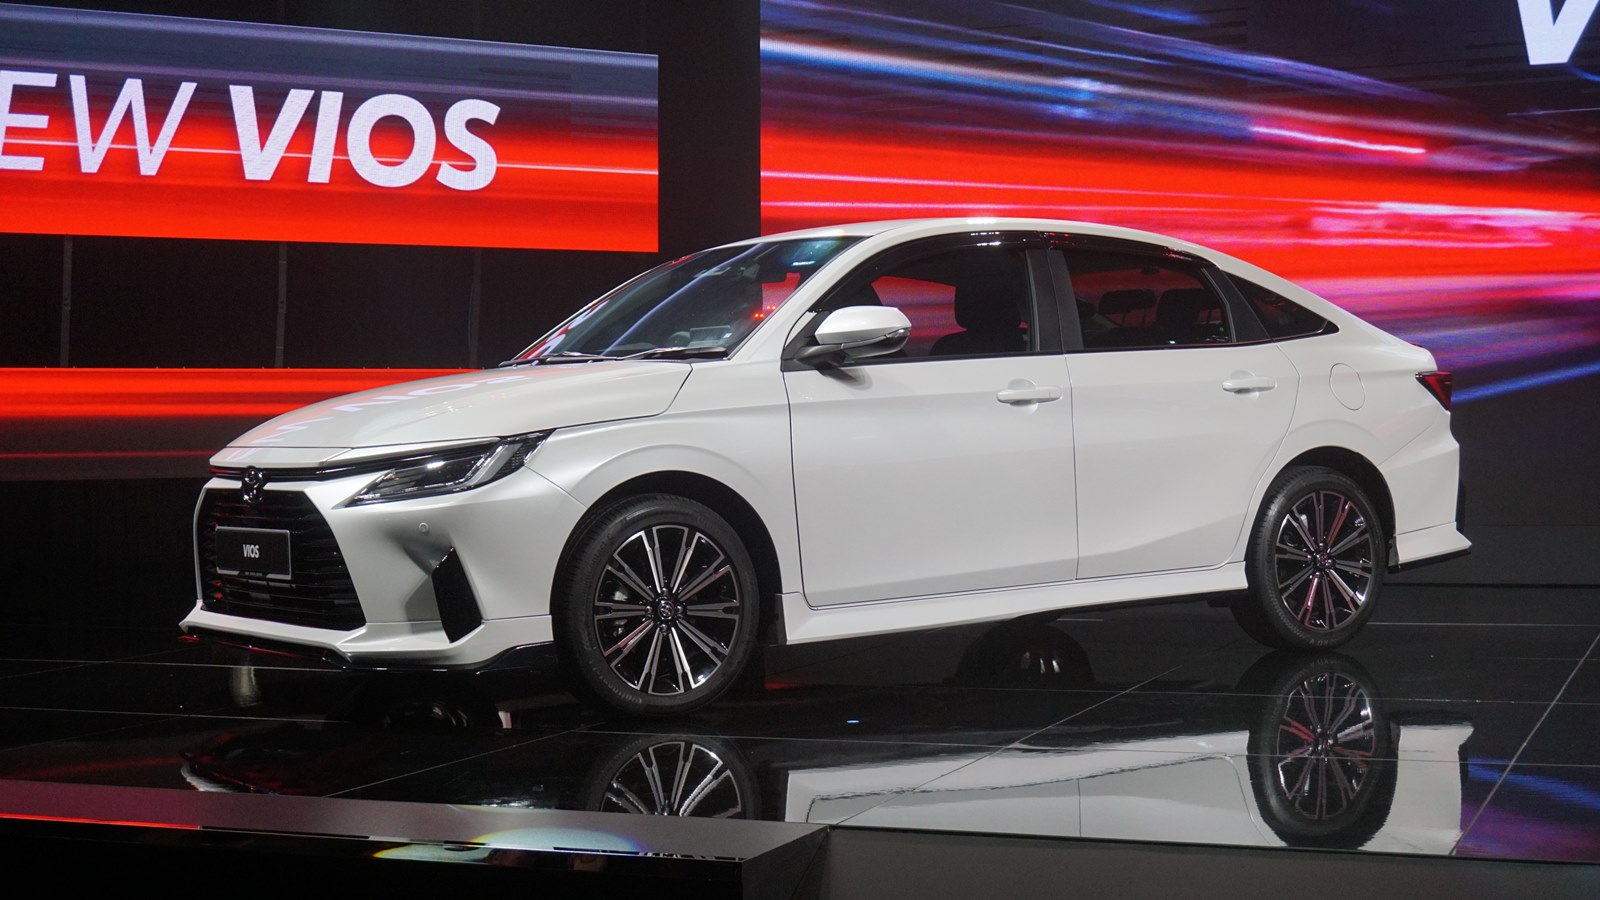 all-new 4th generation toyota vios launched in malaysia, priced from rm89,600